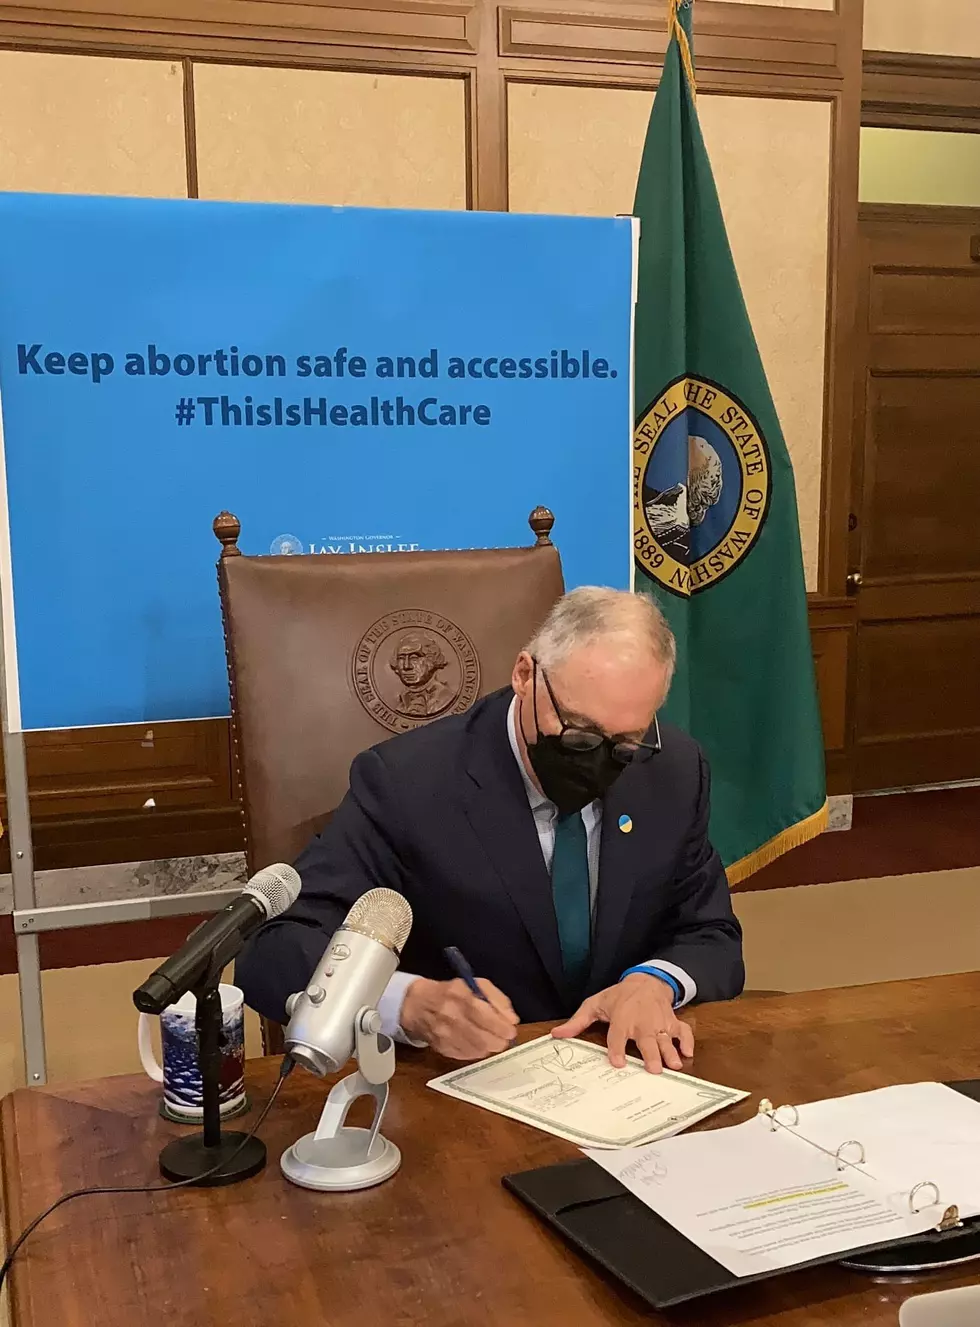 Governor Jay Inslee Signs The Affirm Washington Abortion Access Act